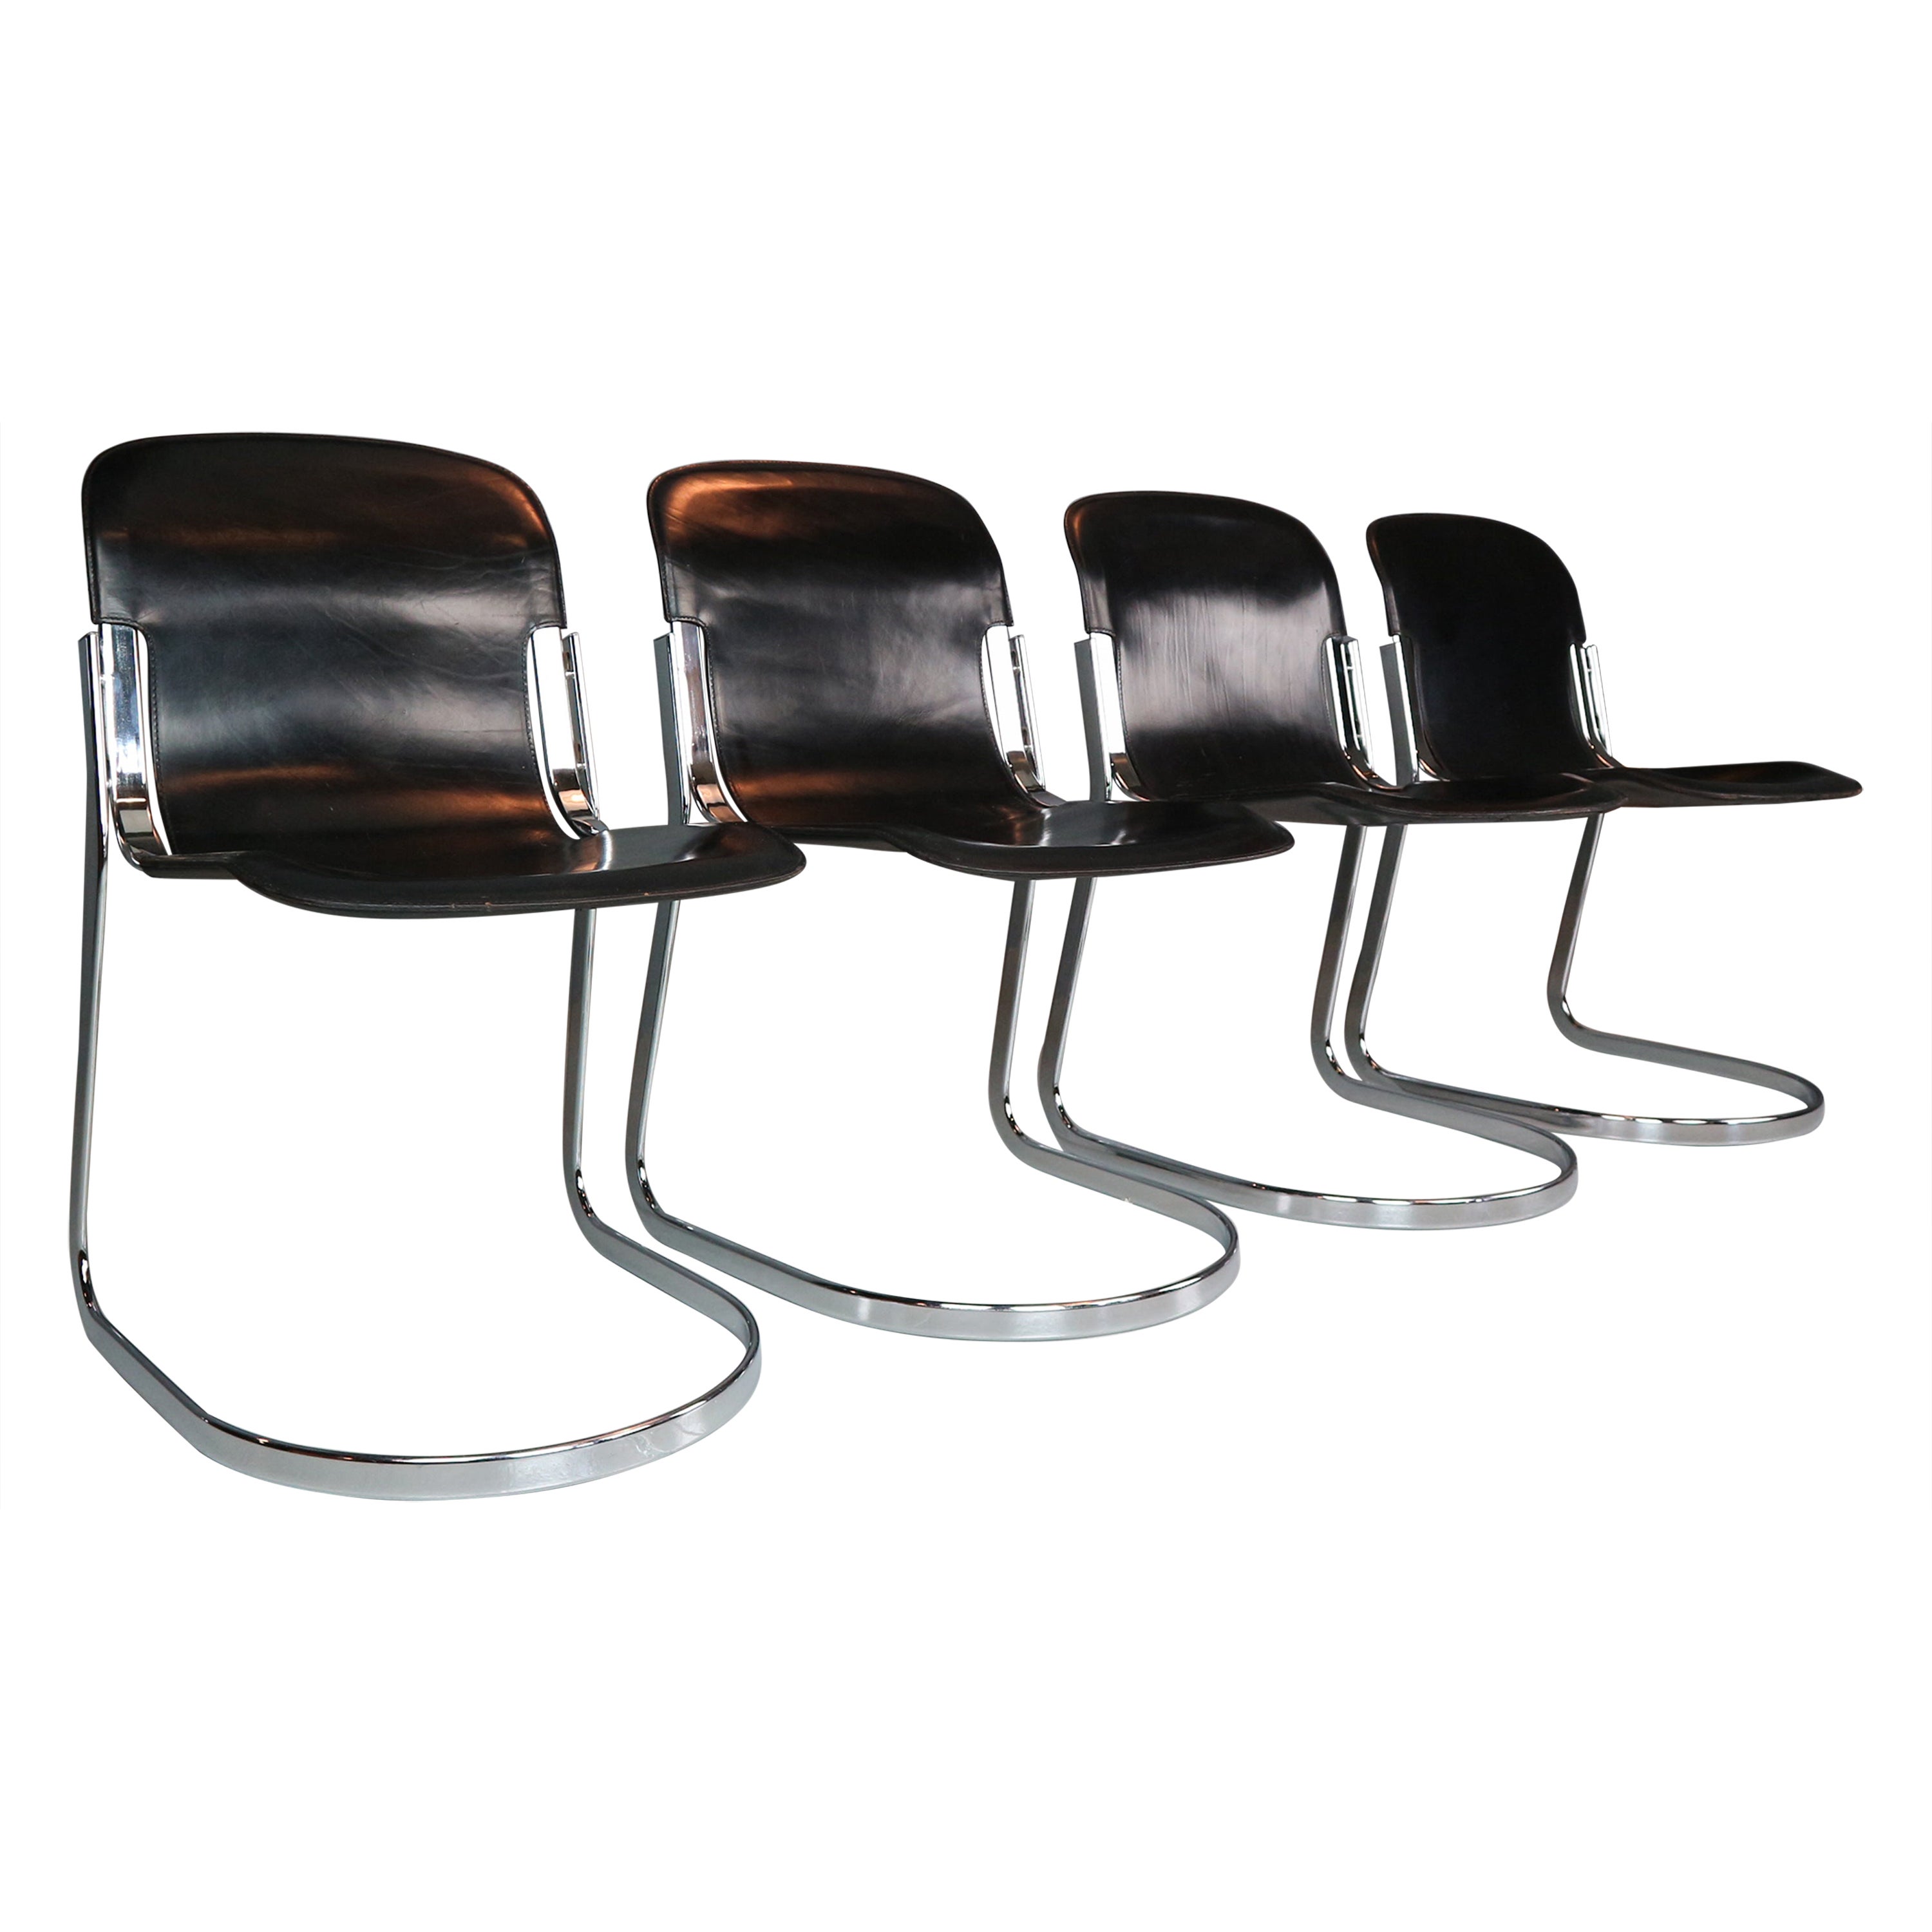 Willy Rizzo Set of Black Leather Dining Chairs "C2" For Cidue, 1970s, Italy For Sale